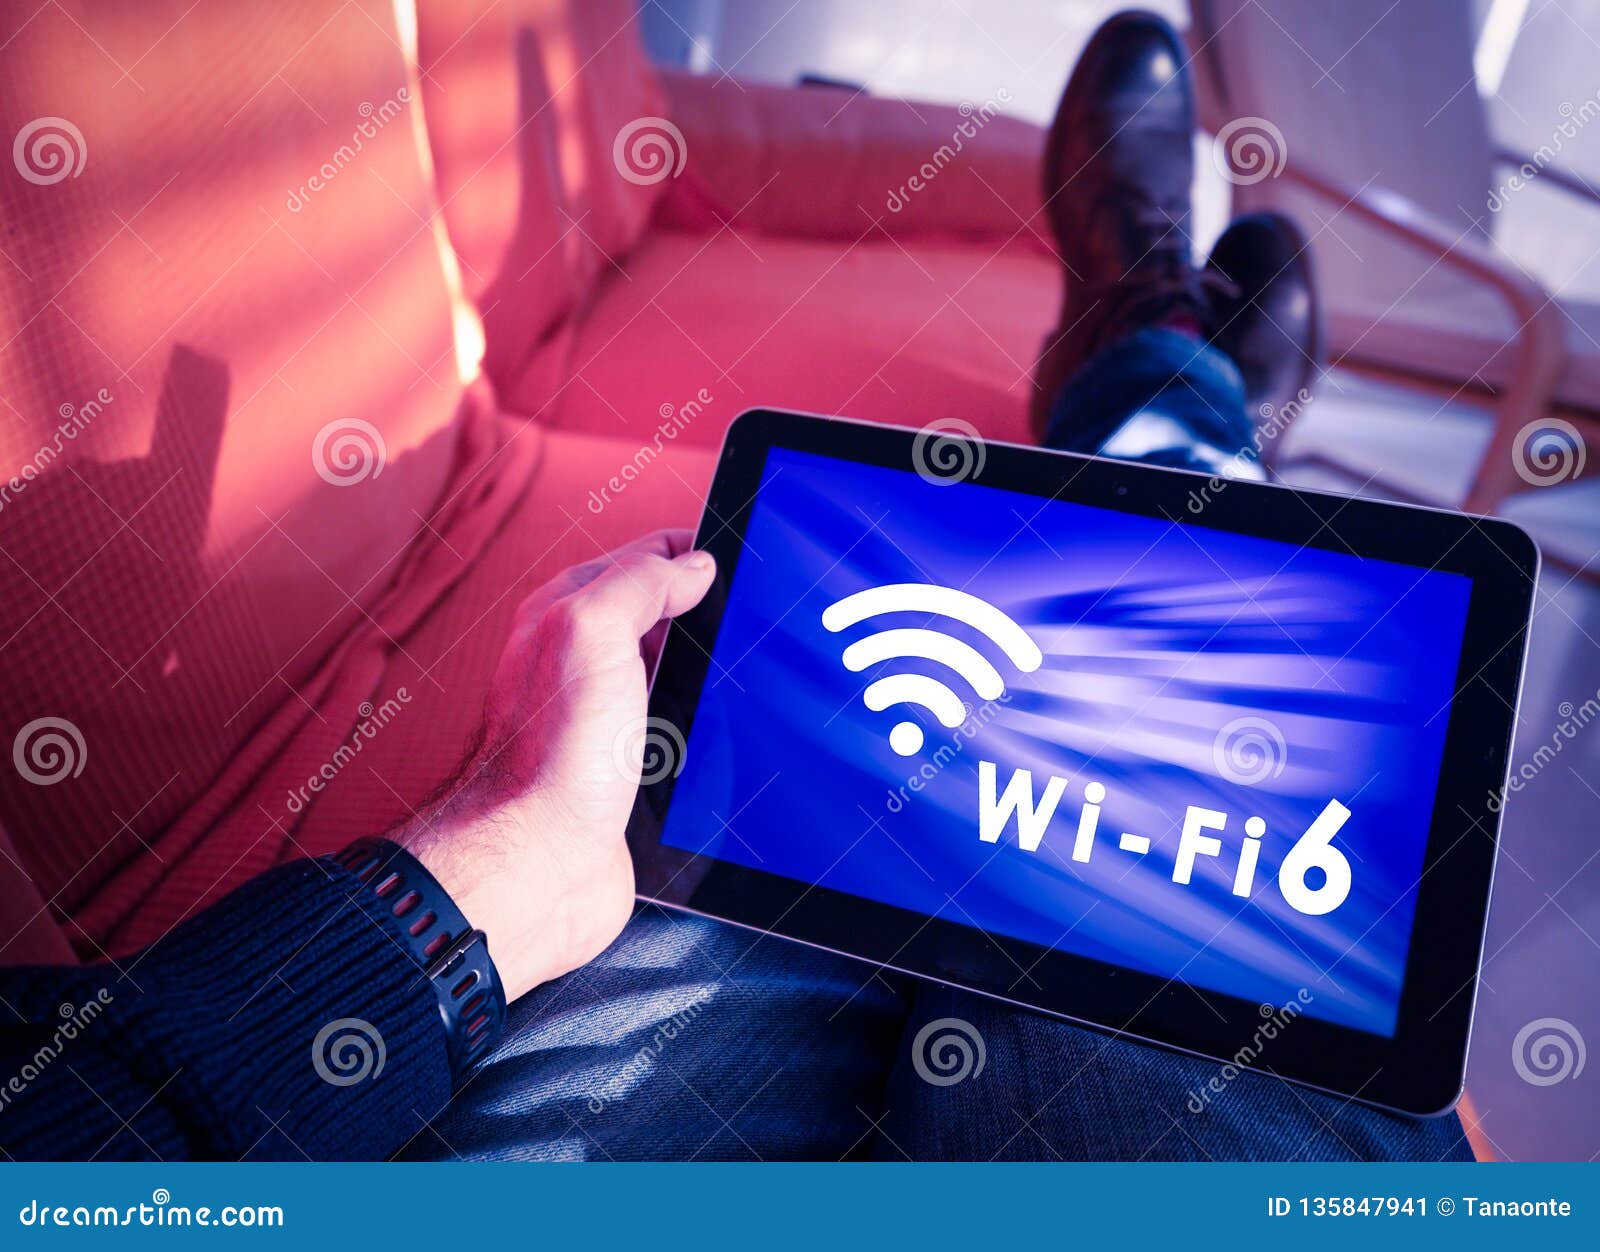 man resting with wifi 6 words and icon on tablet screen.